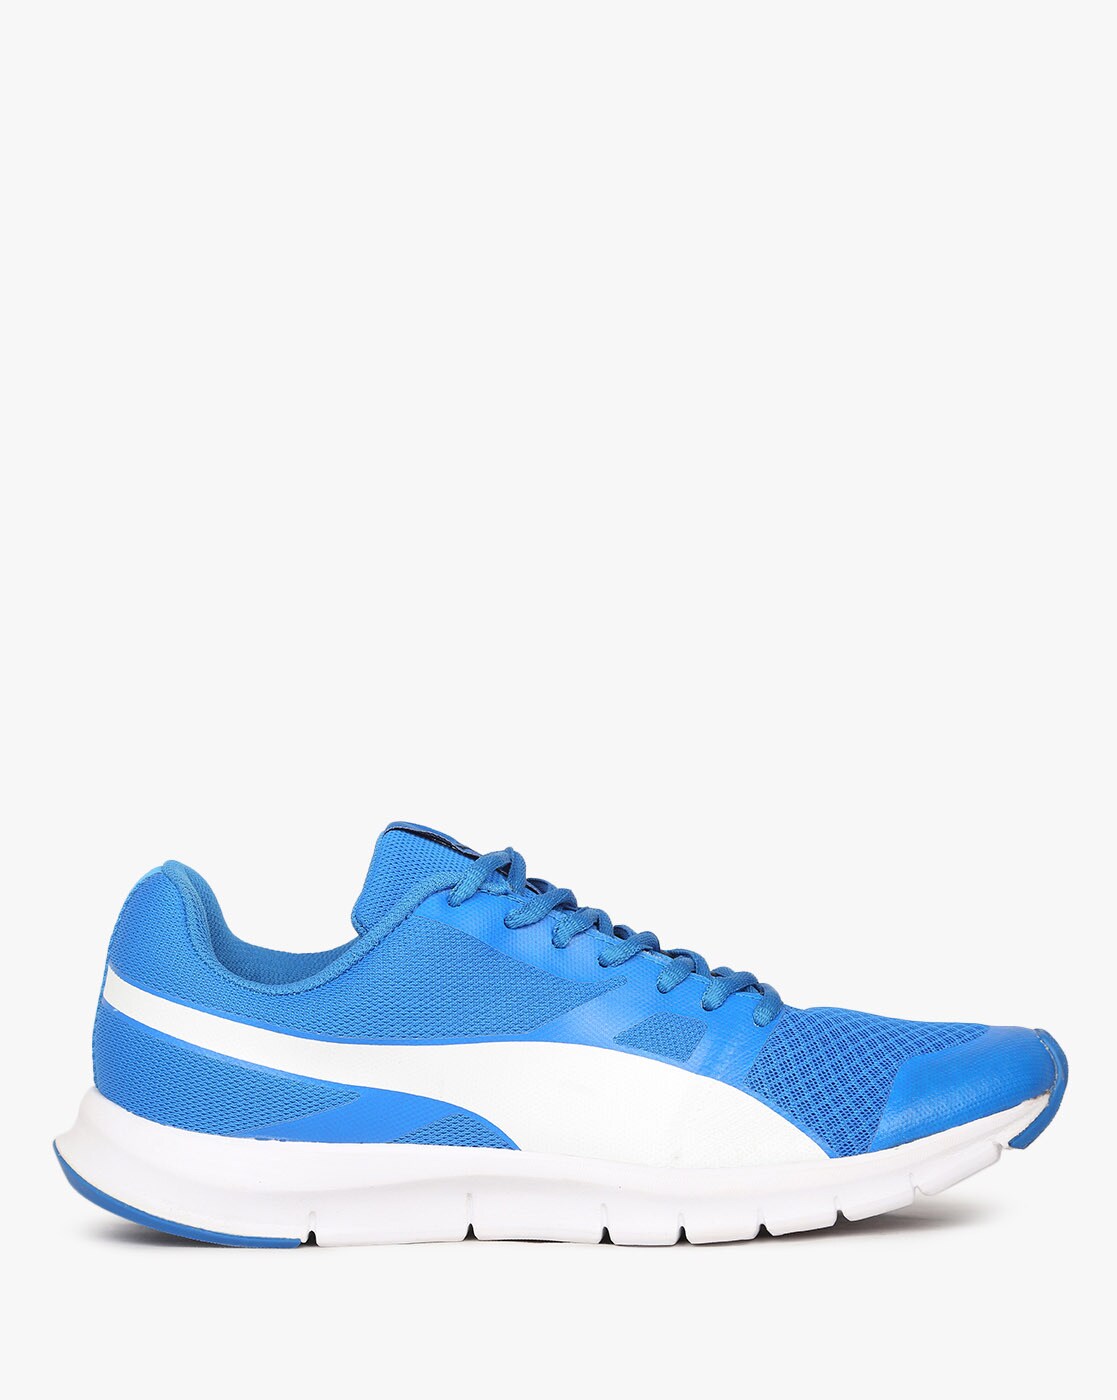 Buy Sky Blue \u0026 White Sports Shoes for 